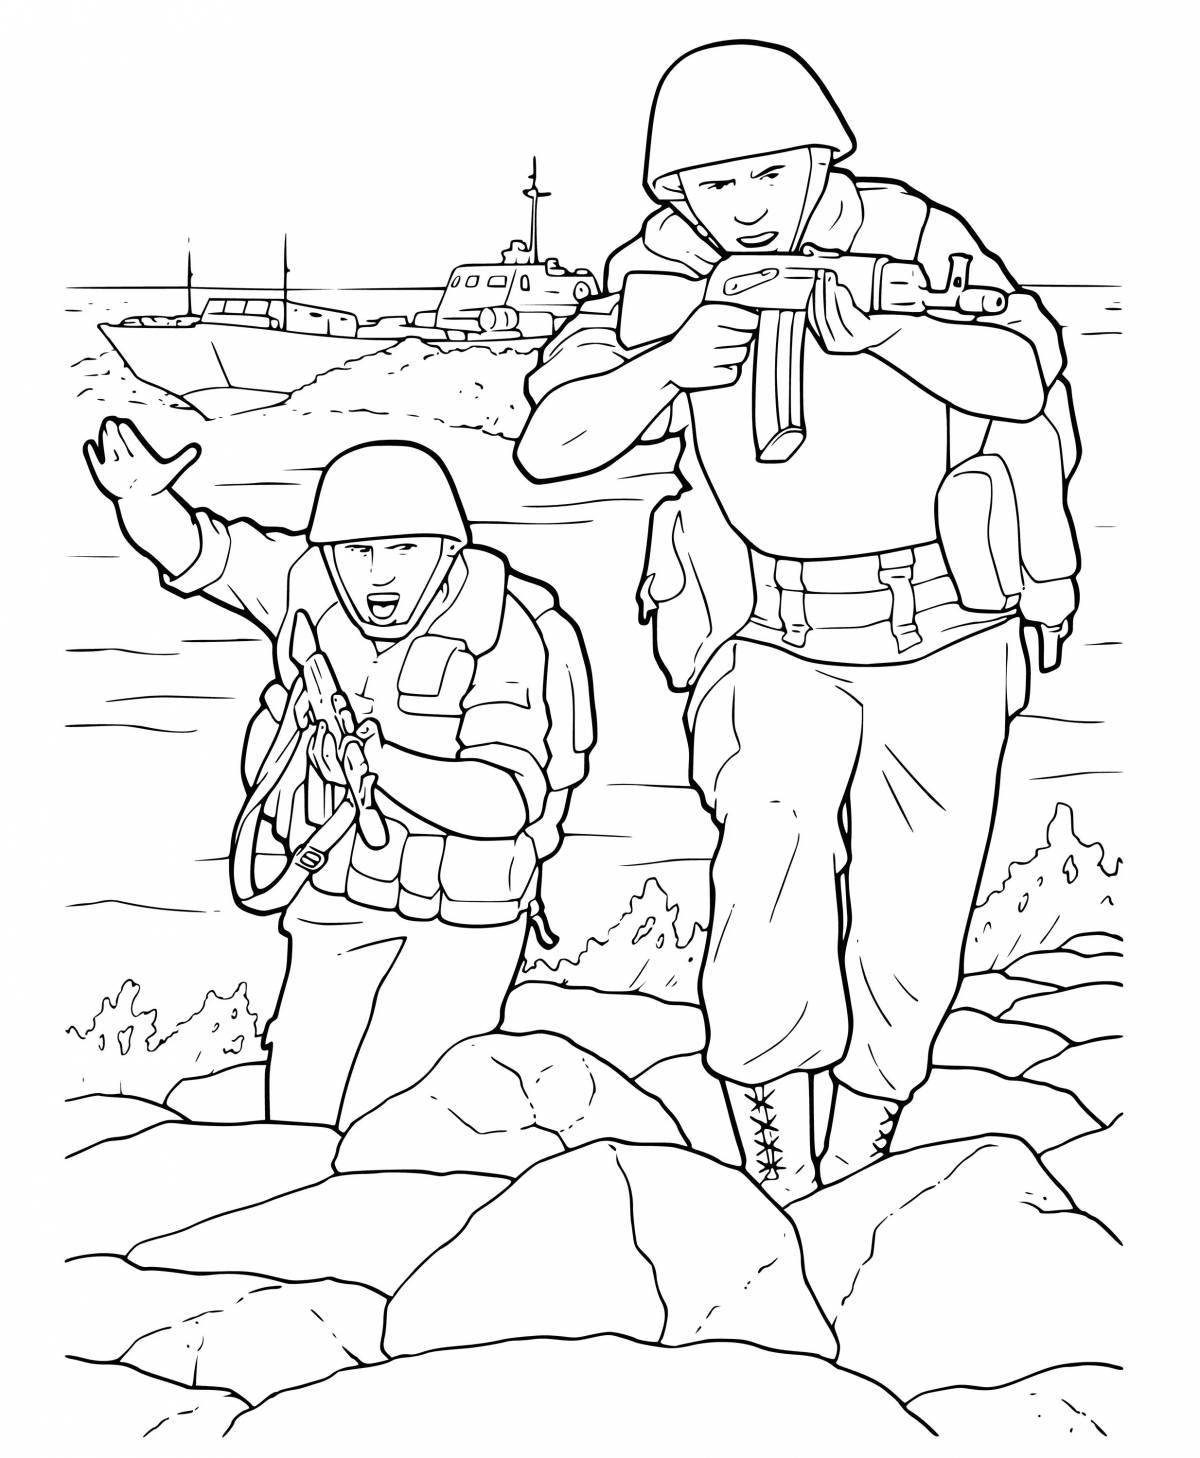 Engaging our army - native coloring for preschoolers